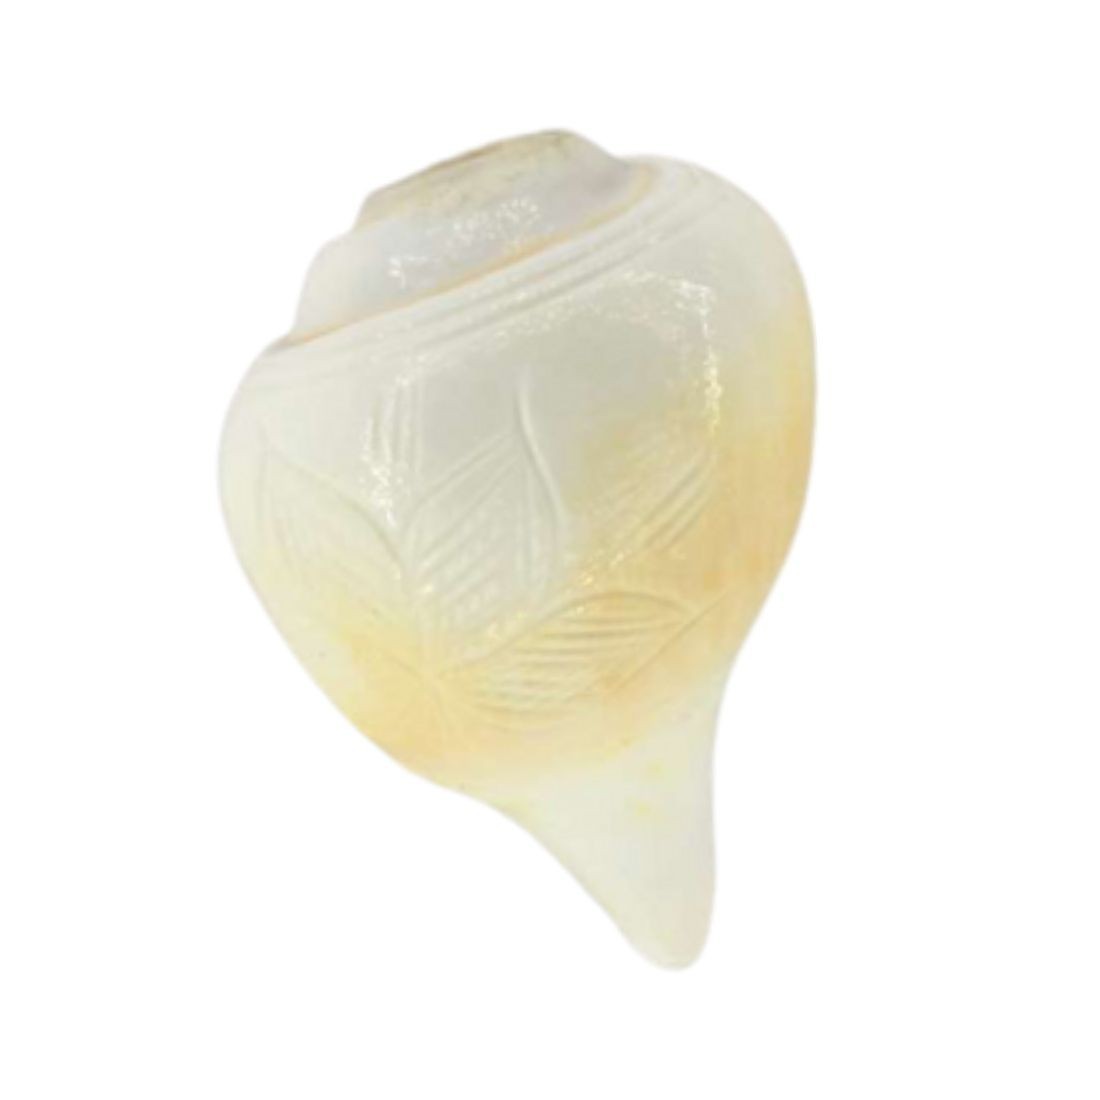 Blowing Shankh for Pooja Original Conch Shell, Size: 3.5 inches (Small)